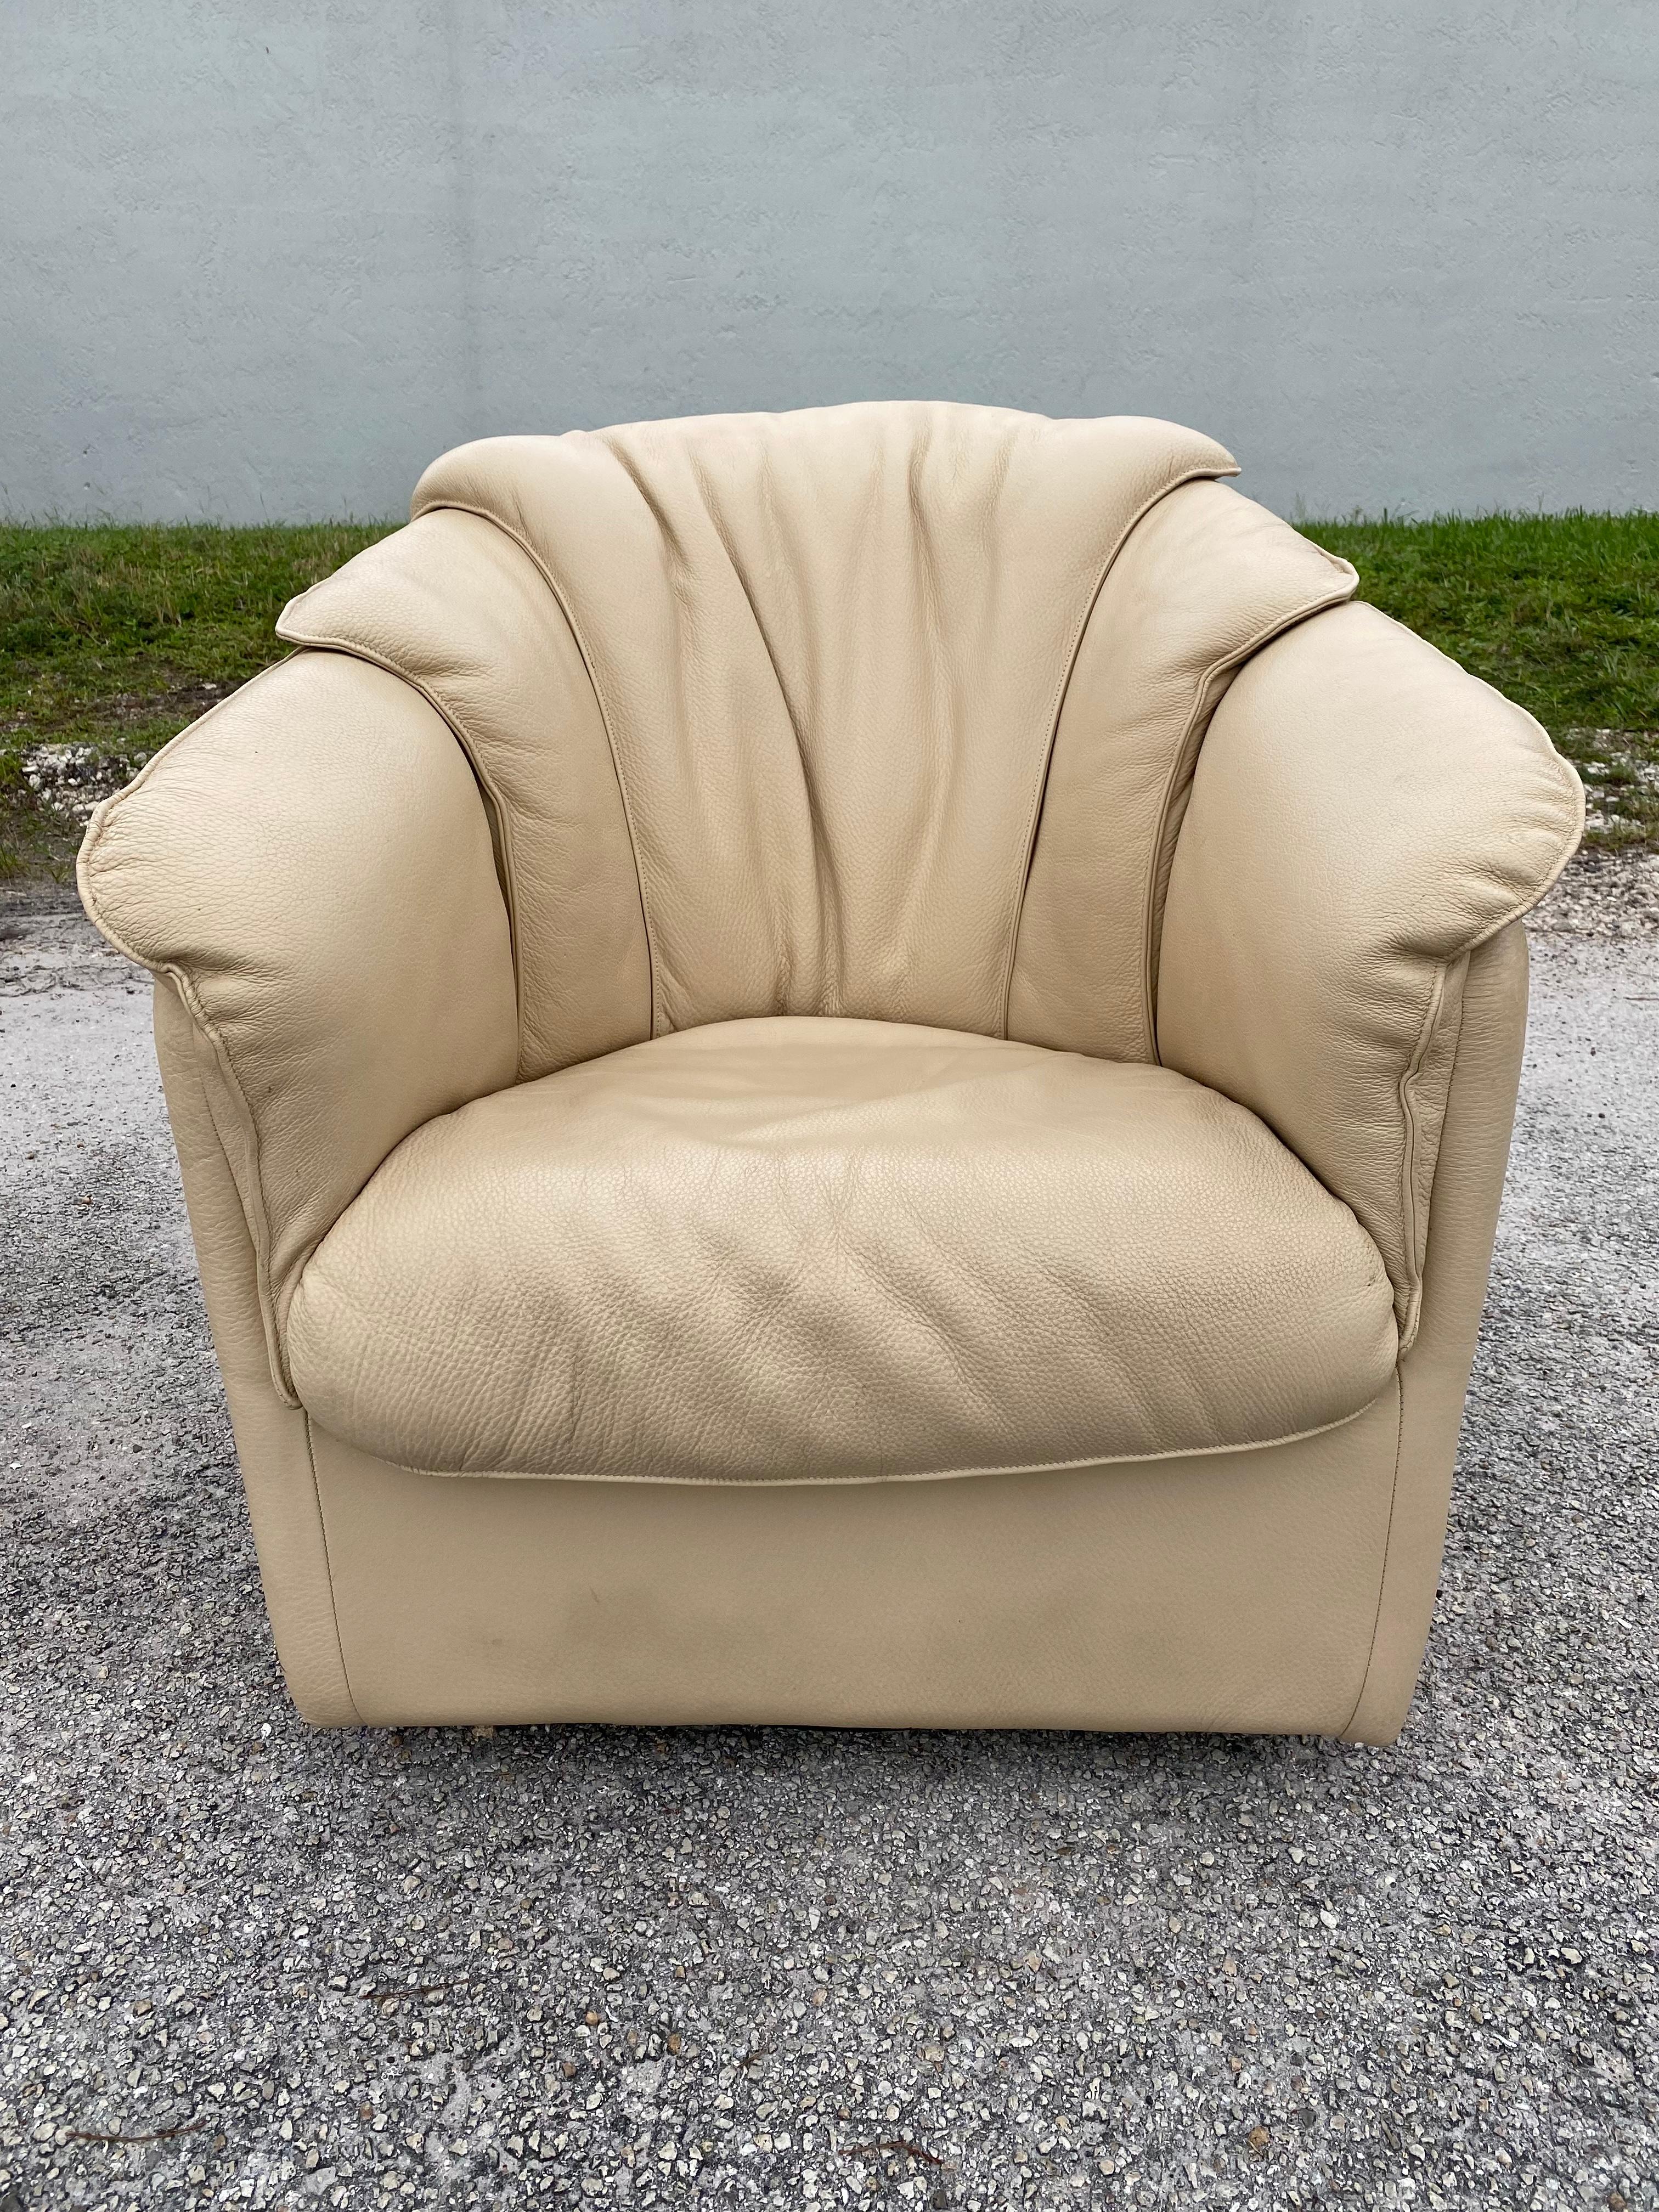 Late 20th Century 1980s Natuzzi Beige Leather Barrel Swivel Chairs, Set of 2 For Sale